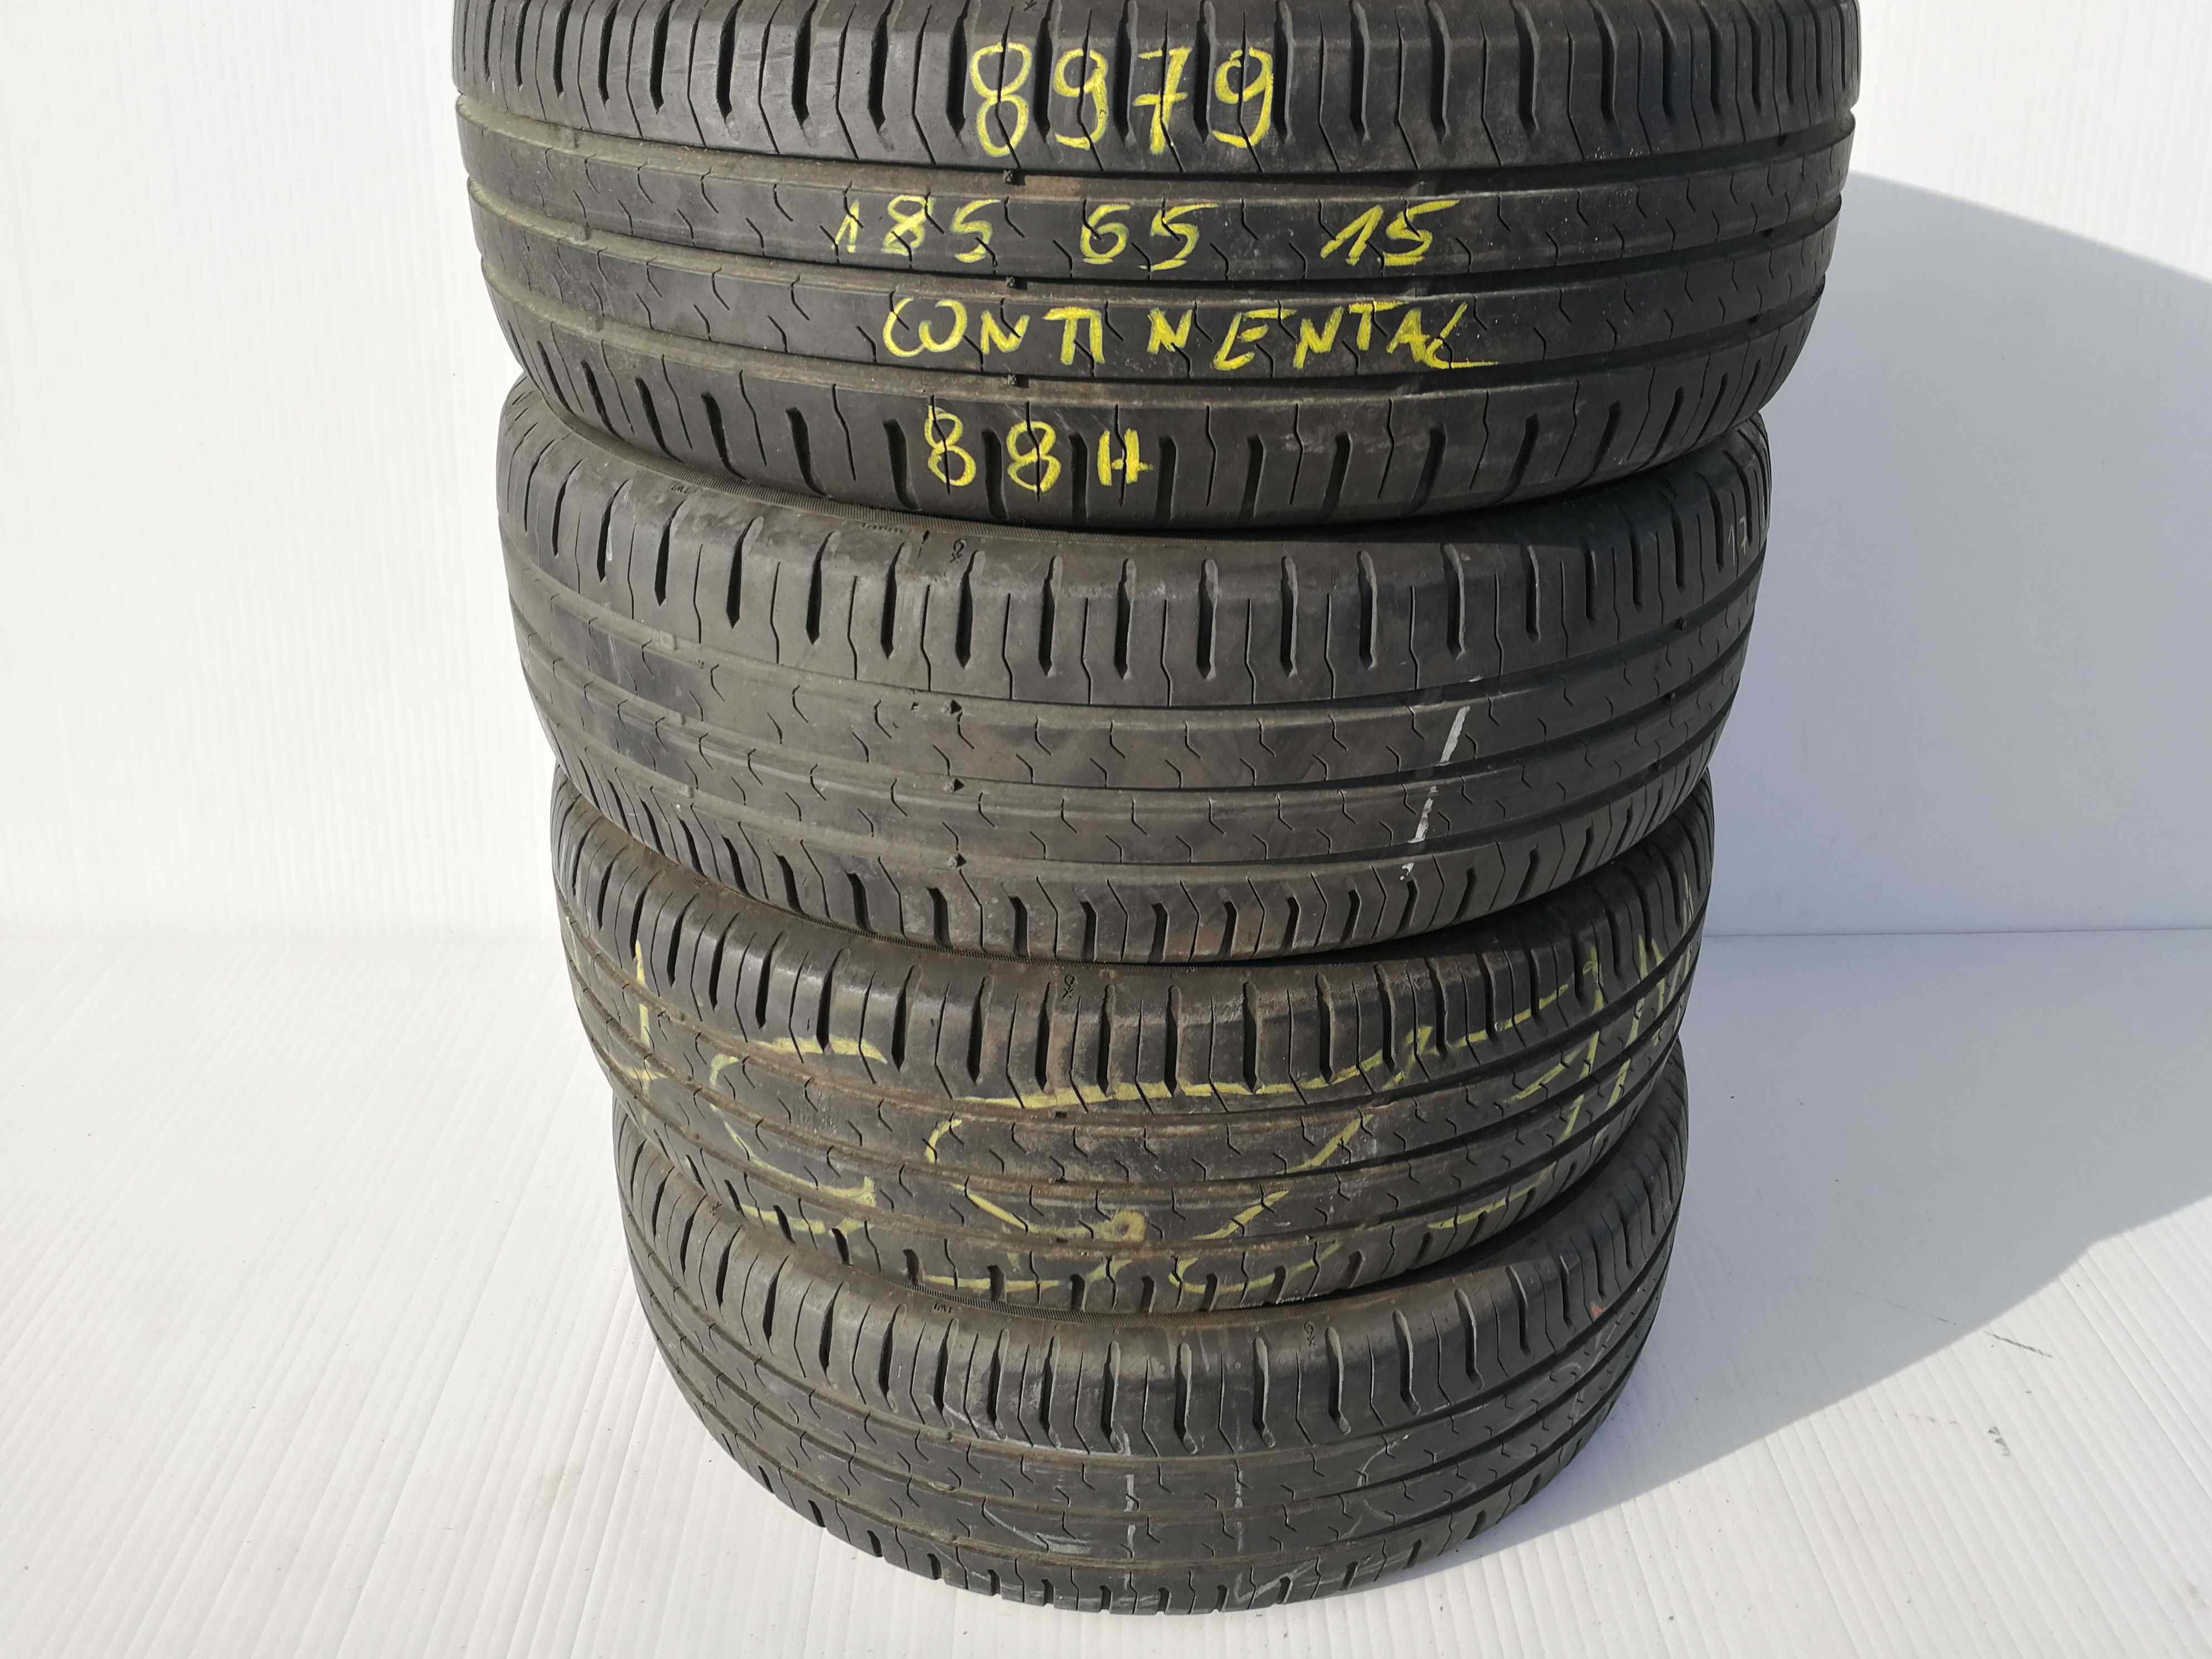 Continental ContiEcoContact 5 185/65r15 88H N8979